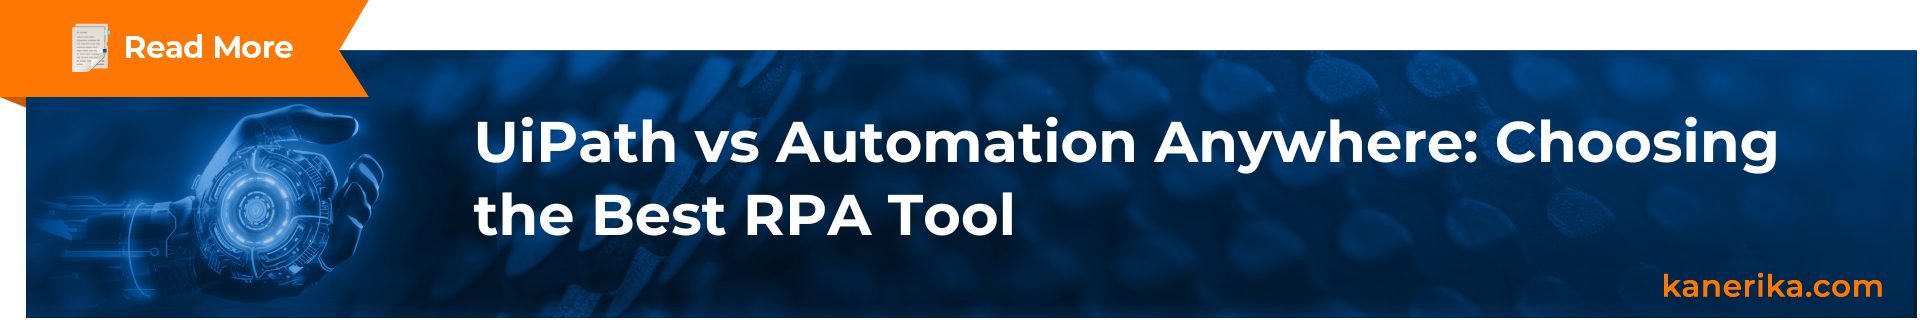 Read more on RPA